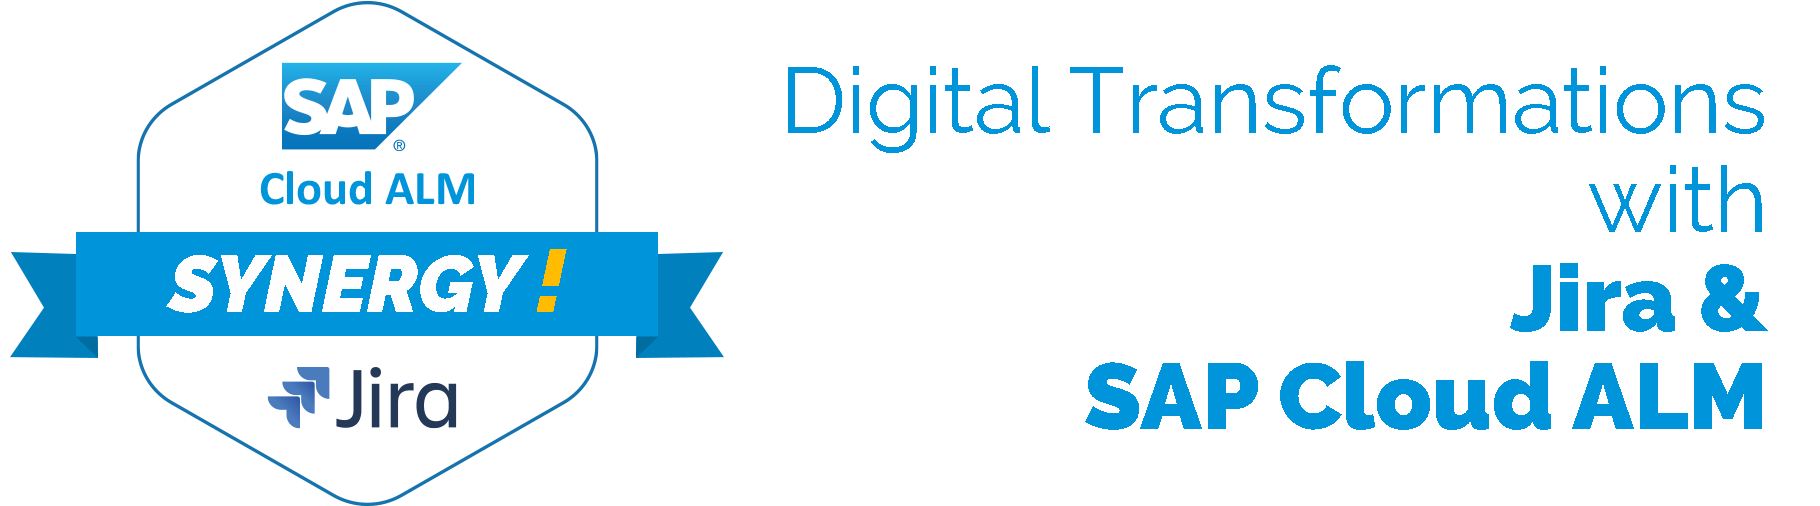 Digital Transformations with Jira and SAP Cloud ALM